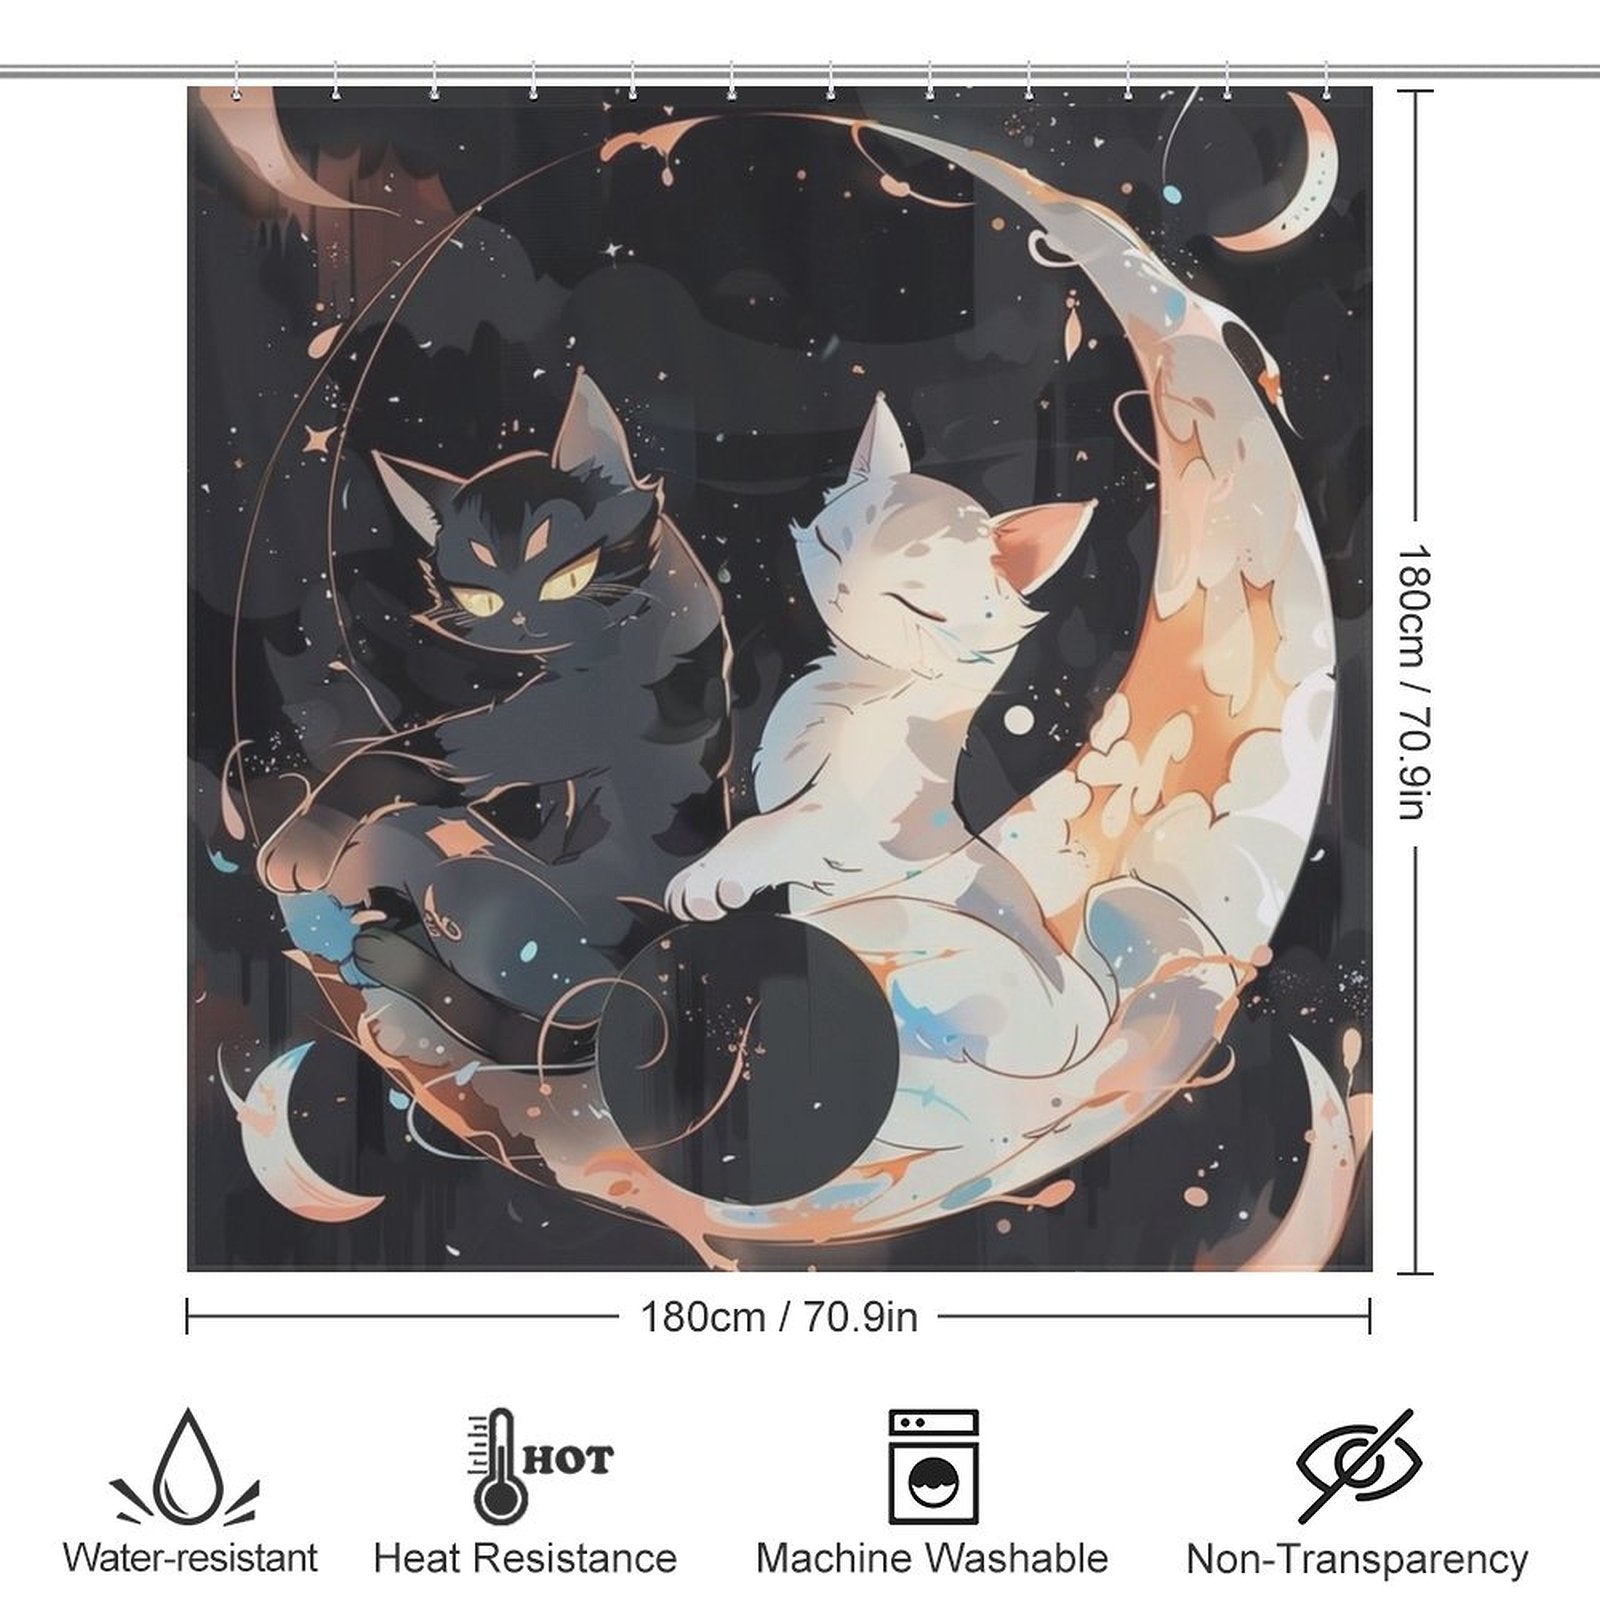 A decorative tapestry featuring two stylized cats intertwined with celestial elements, this Black and White Moon Cat Cute Shower Curtain-Cottoncat from Cotton Cat is perfect for bathroom decor. Product details include water-resistant, heat-resistant, machine washable, and non-transparency attributes. Size: 180cm x 180cm.